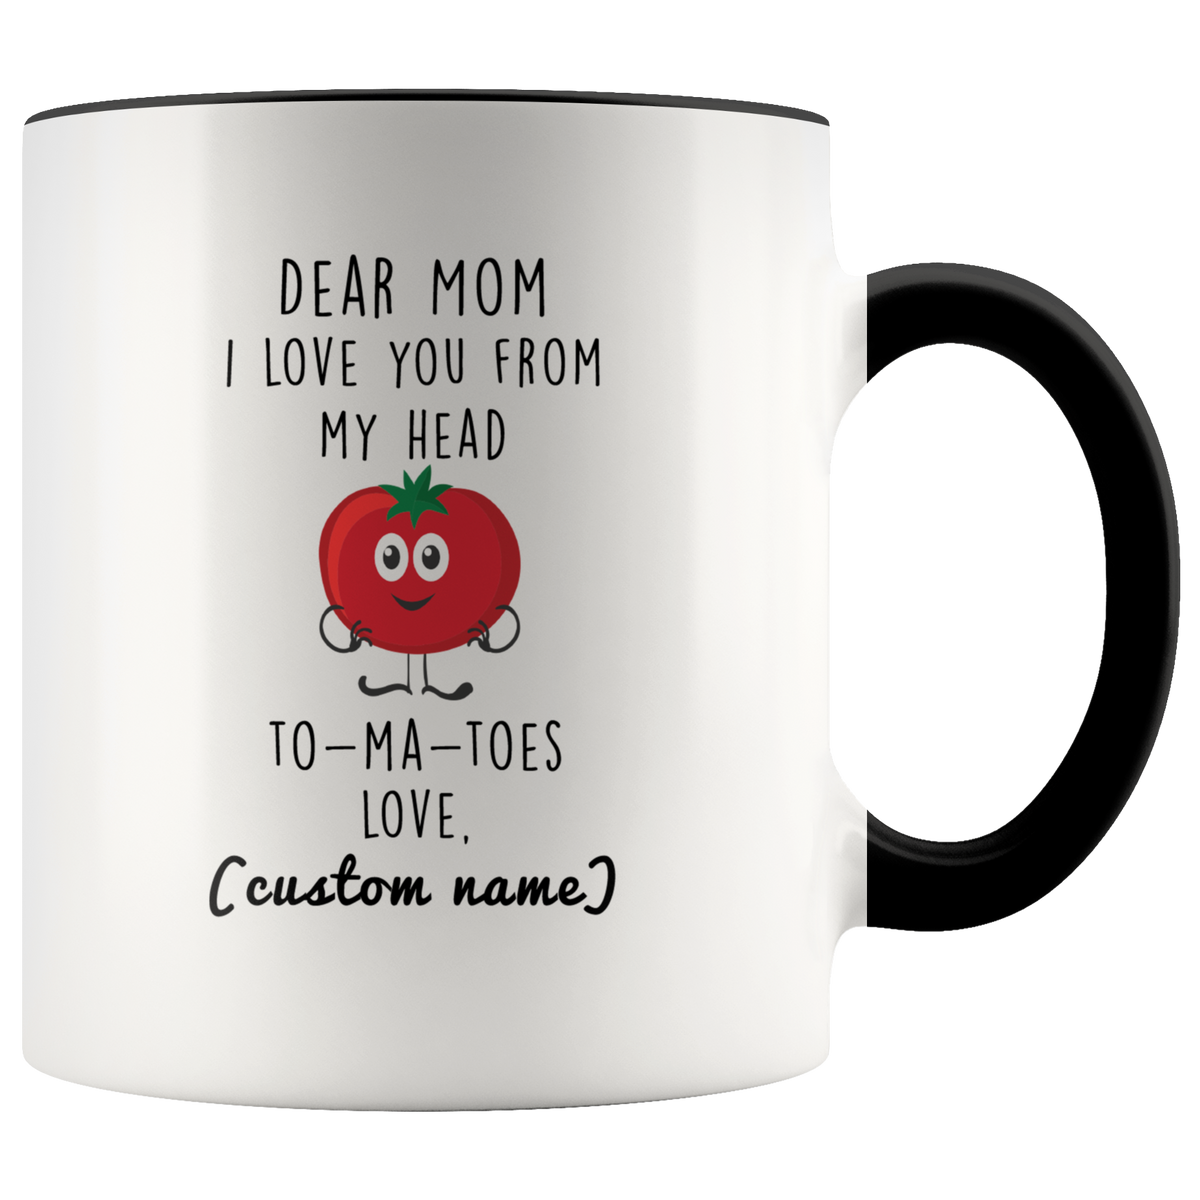 Personalized Funny Mother's Day Mug Gift - I Love You From Head To Toes Accent Coffee Mug 11oz